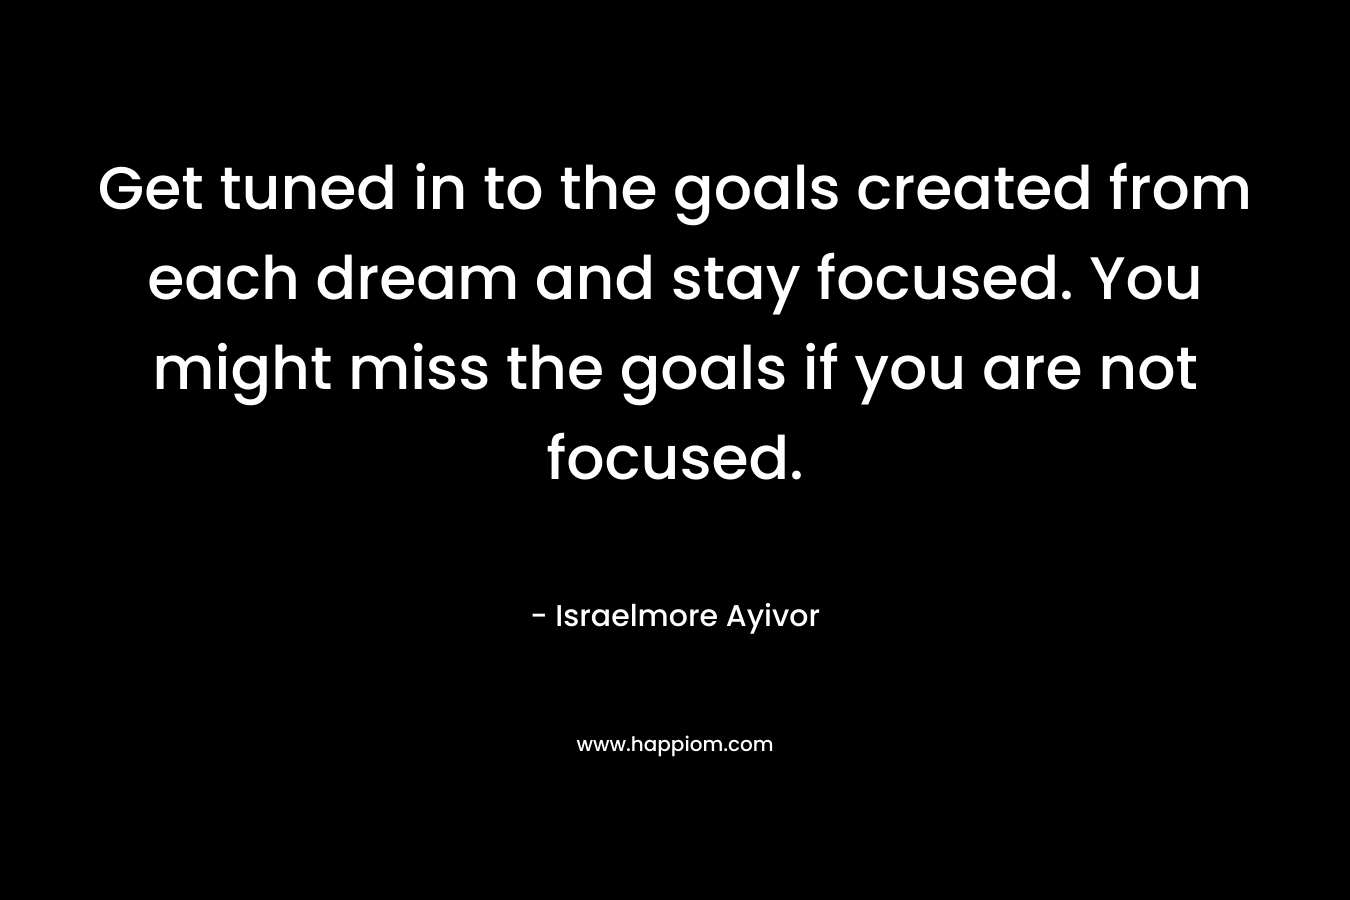 Get tuned in to the goals created from each dream and stay focused. You might miss the goals if you are not focused. – Israelmore Ayivor